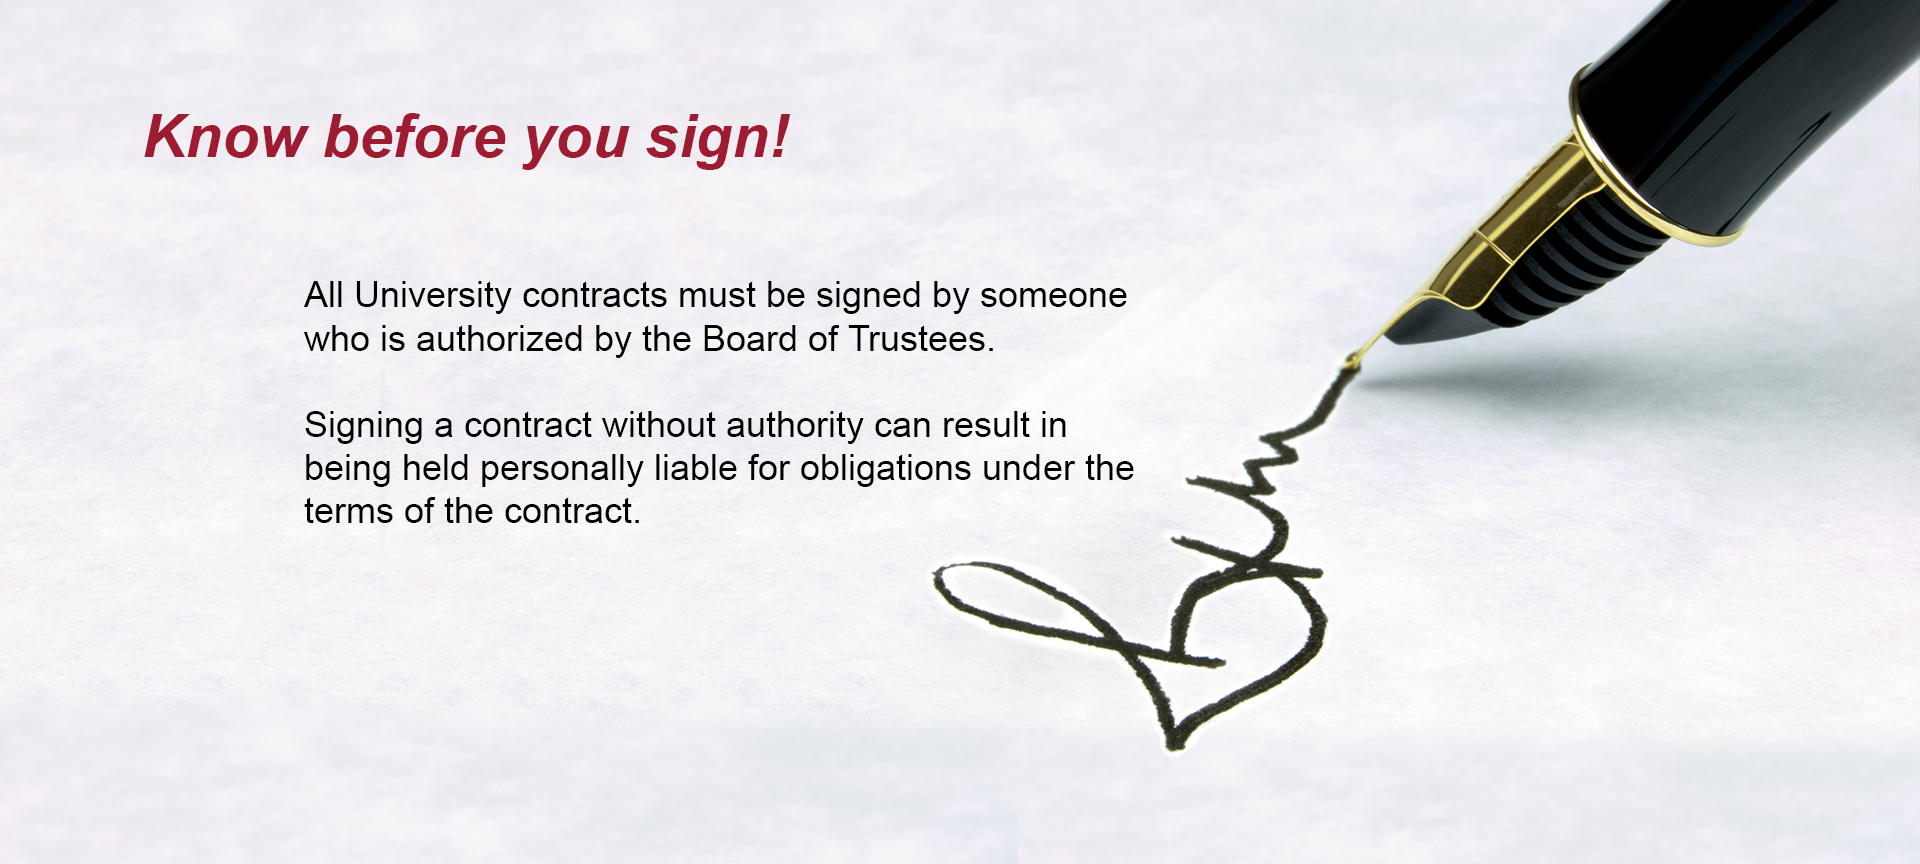 Know before you sign! All University contracts must be signed by someone who is authorized by the Board of Trustees. Signing a contract without authority can result in being held personally liable for obligations under the terms of the contract.